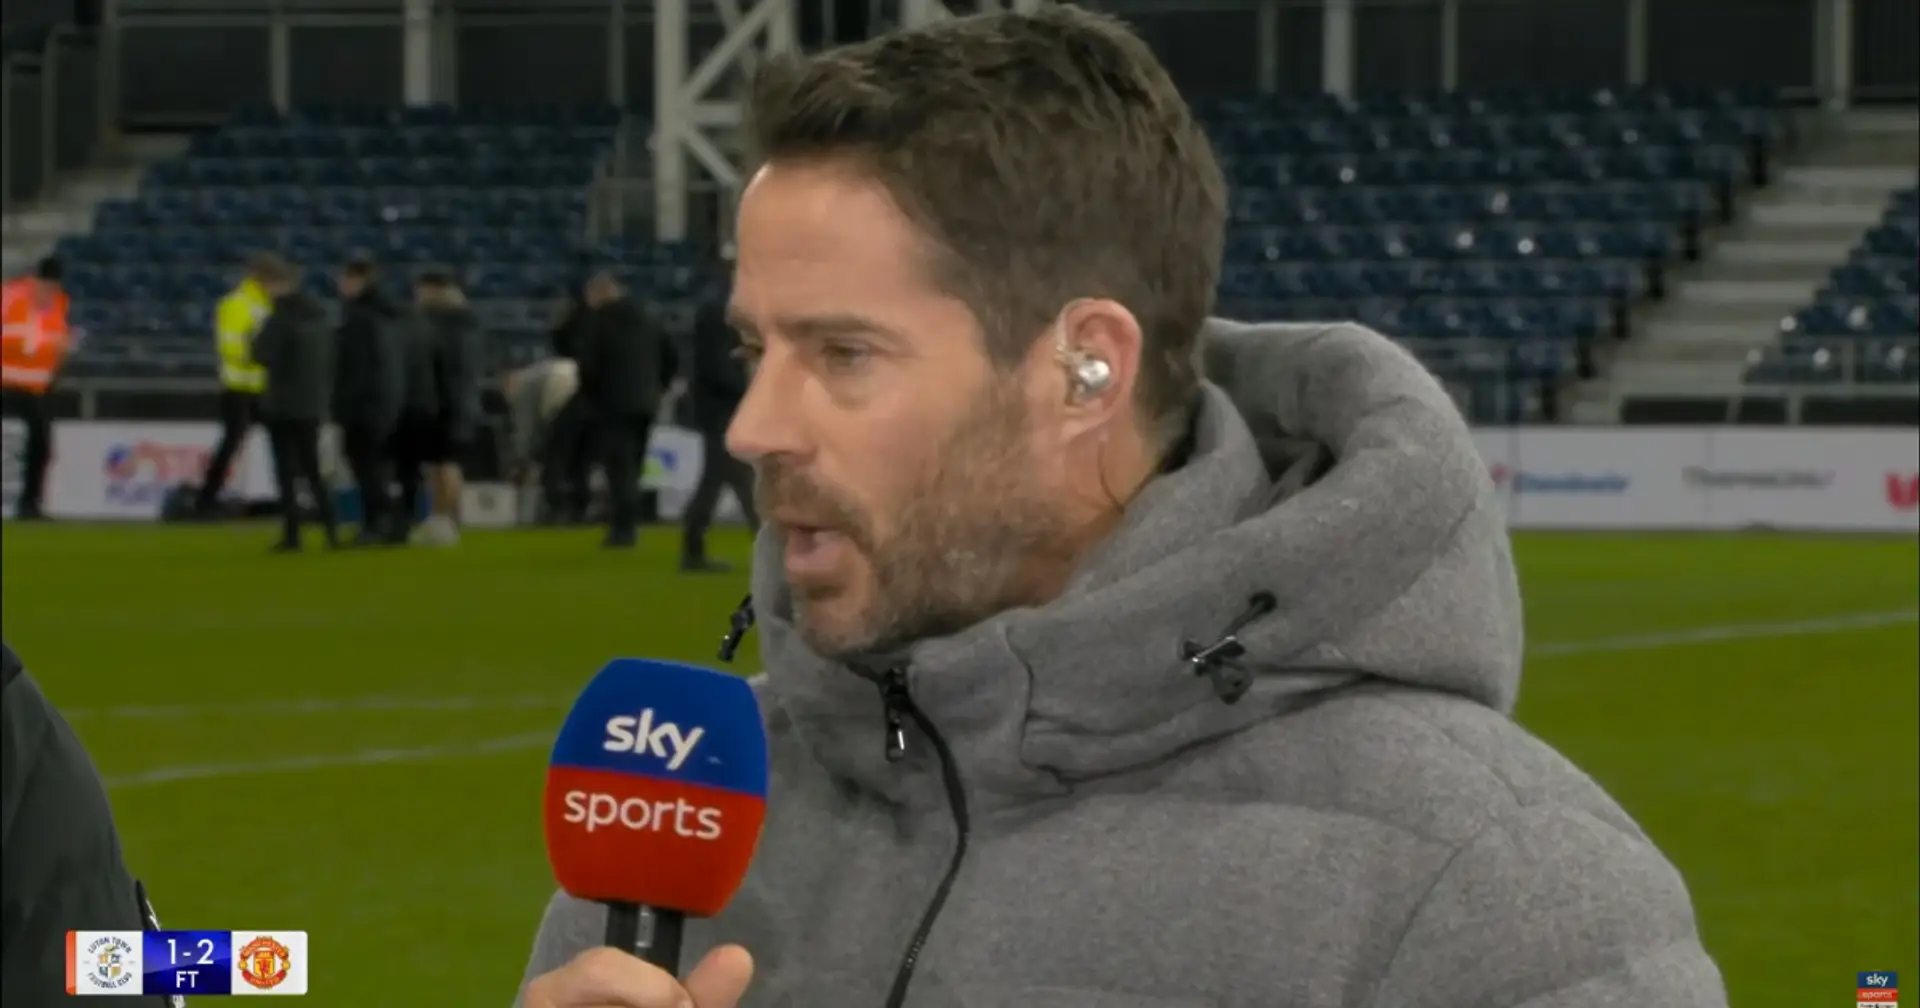 'Spurs and Villa will be looking over their shoulder': Jamie Redknapp backs Man United to compete for top-4 finish